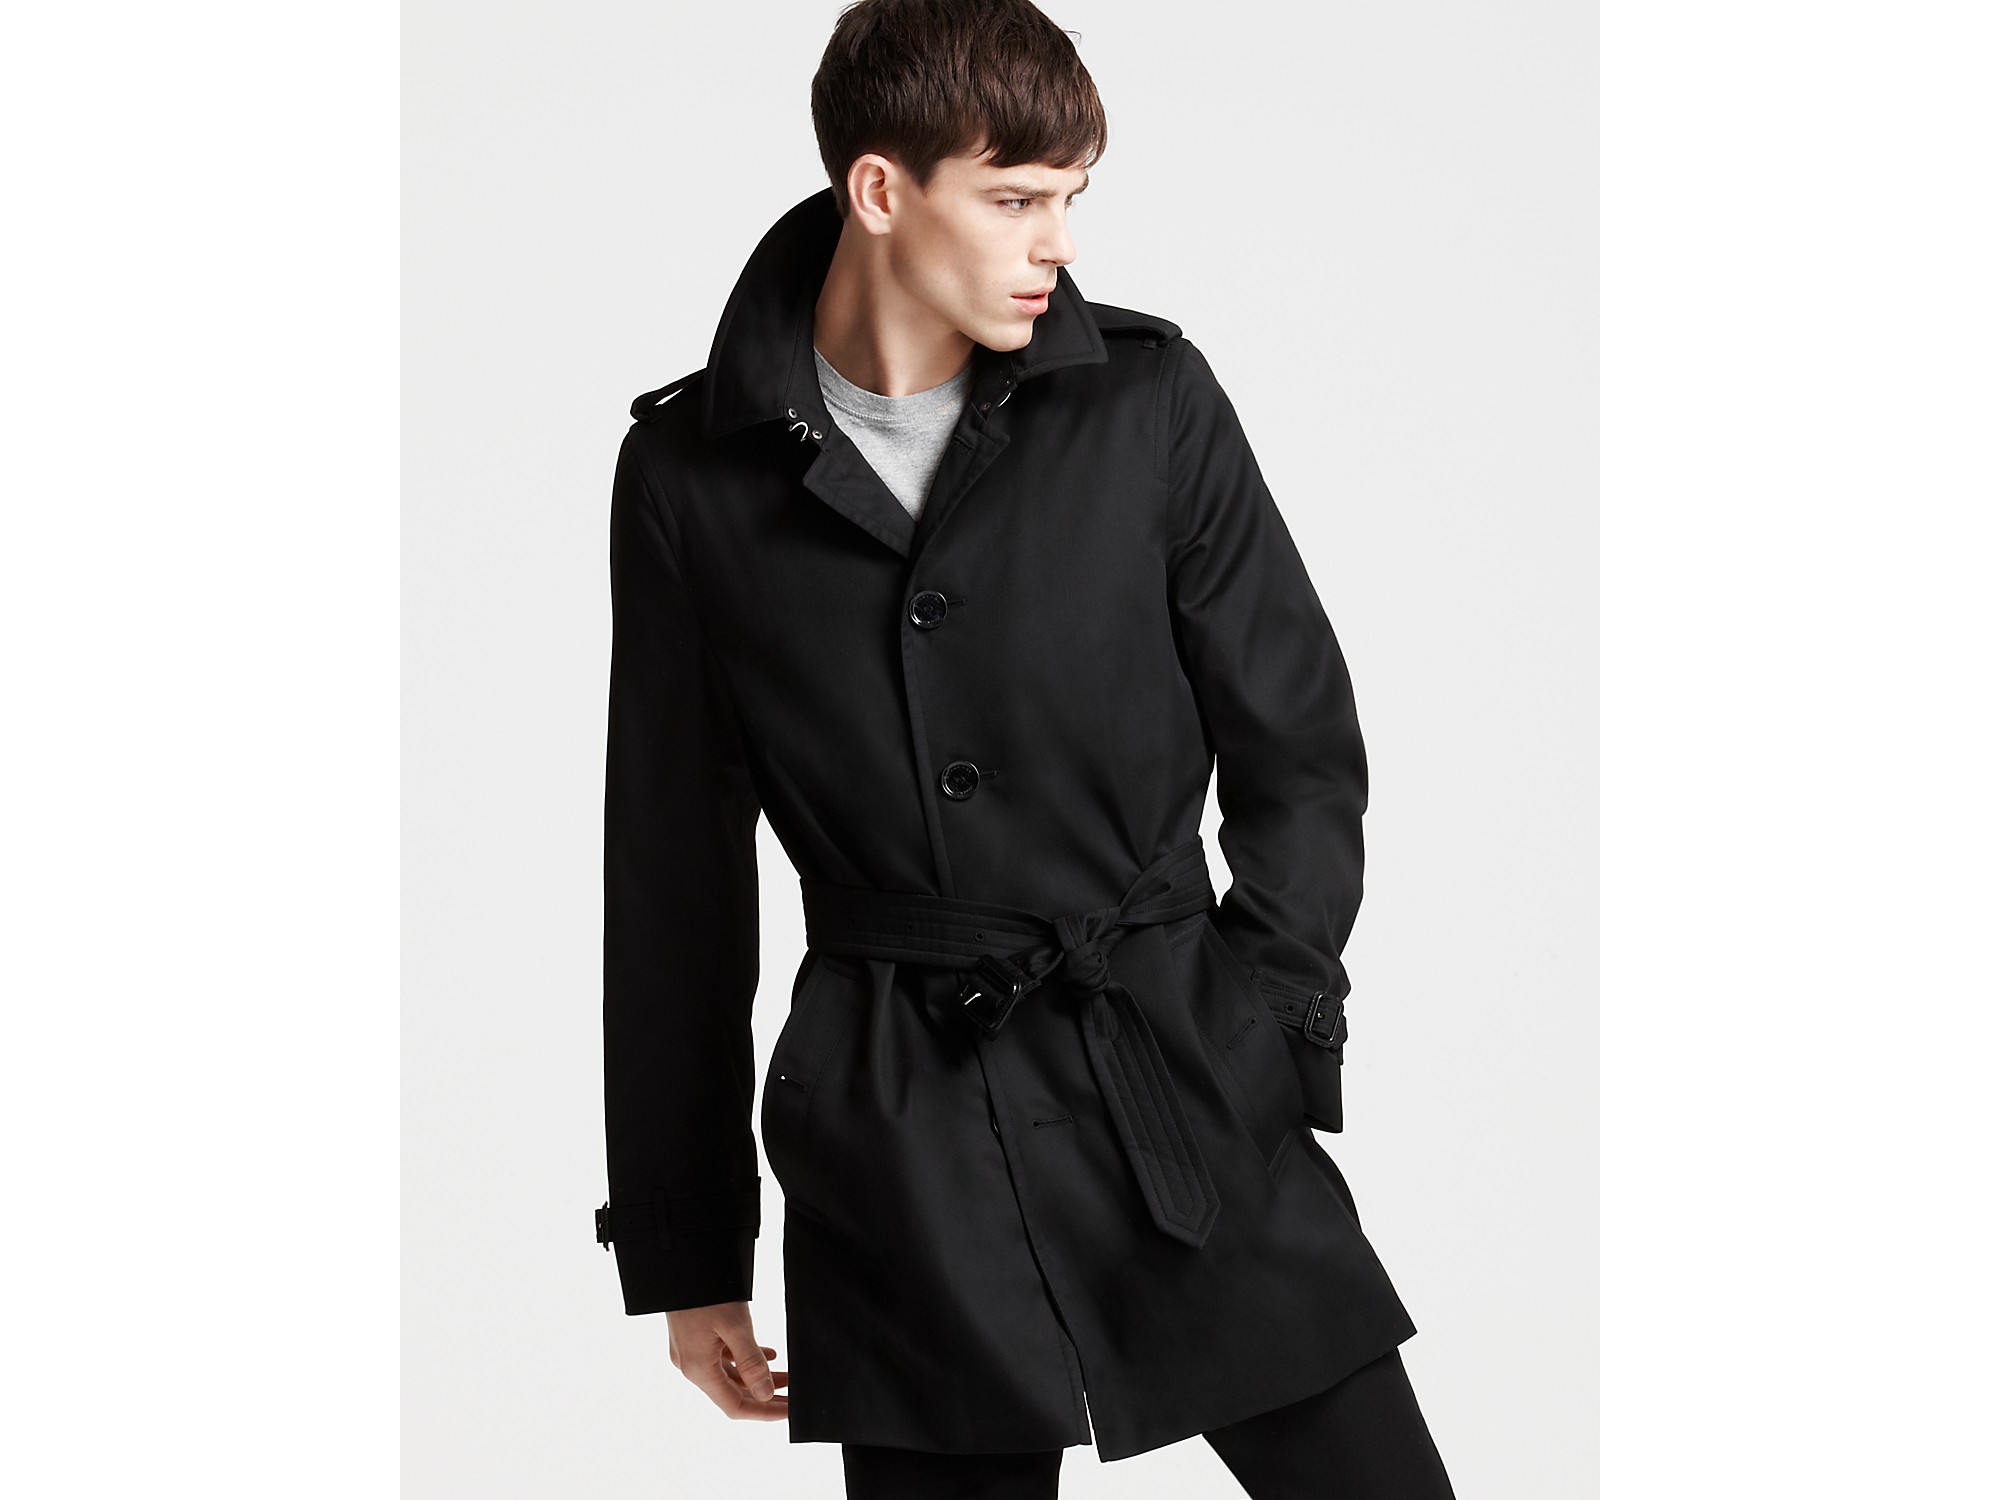 burberry trench coat bloomingdale's